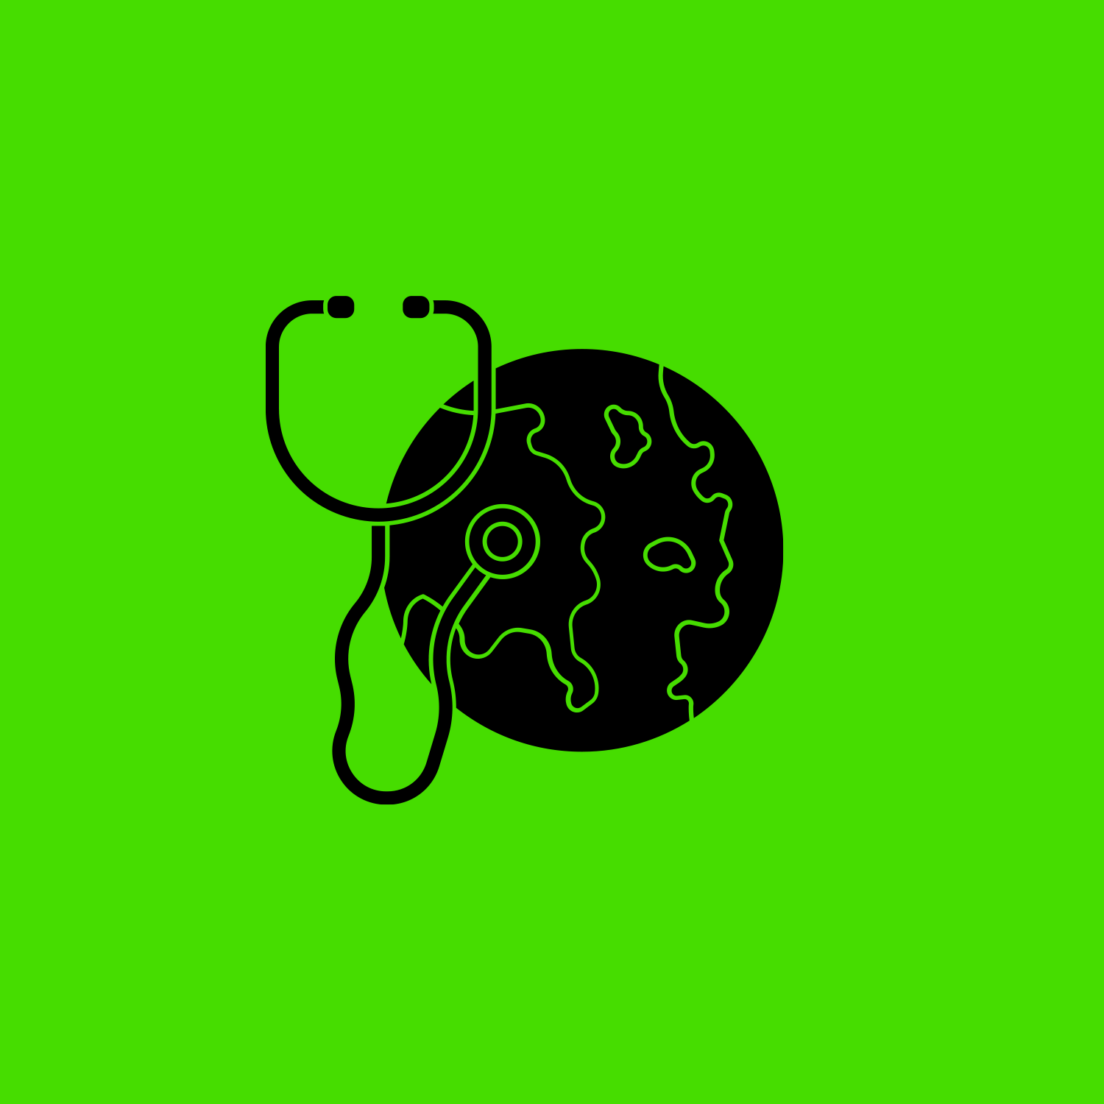 A minimalist graphic design is set against a bright green background. The design depicts a black silhouette of a stethoscope placed over a simplified, black outline of a globe. The stethoscope's chest piece is positioned as if listening to the heart of the Earth, symbolizing global healthcare.